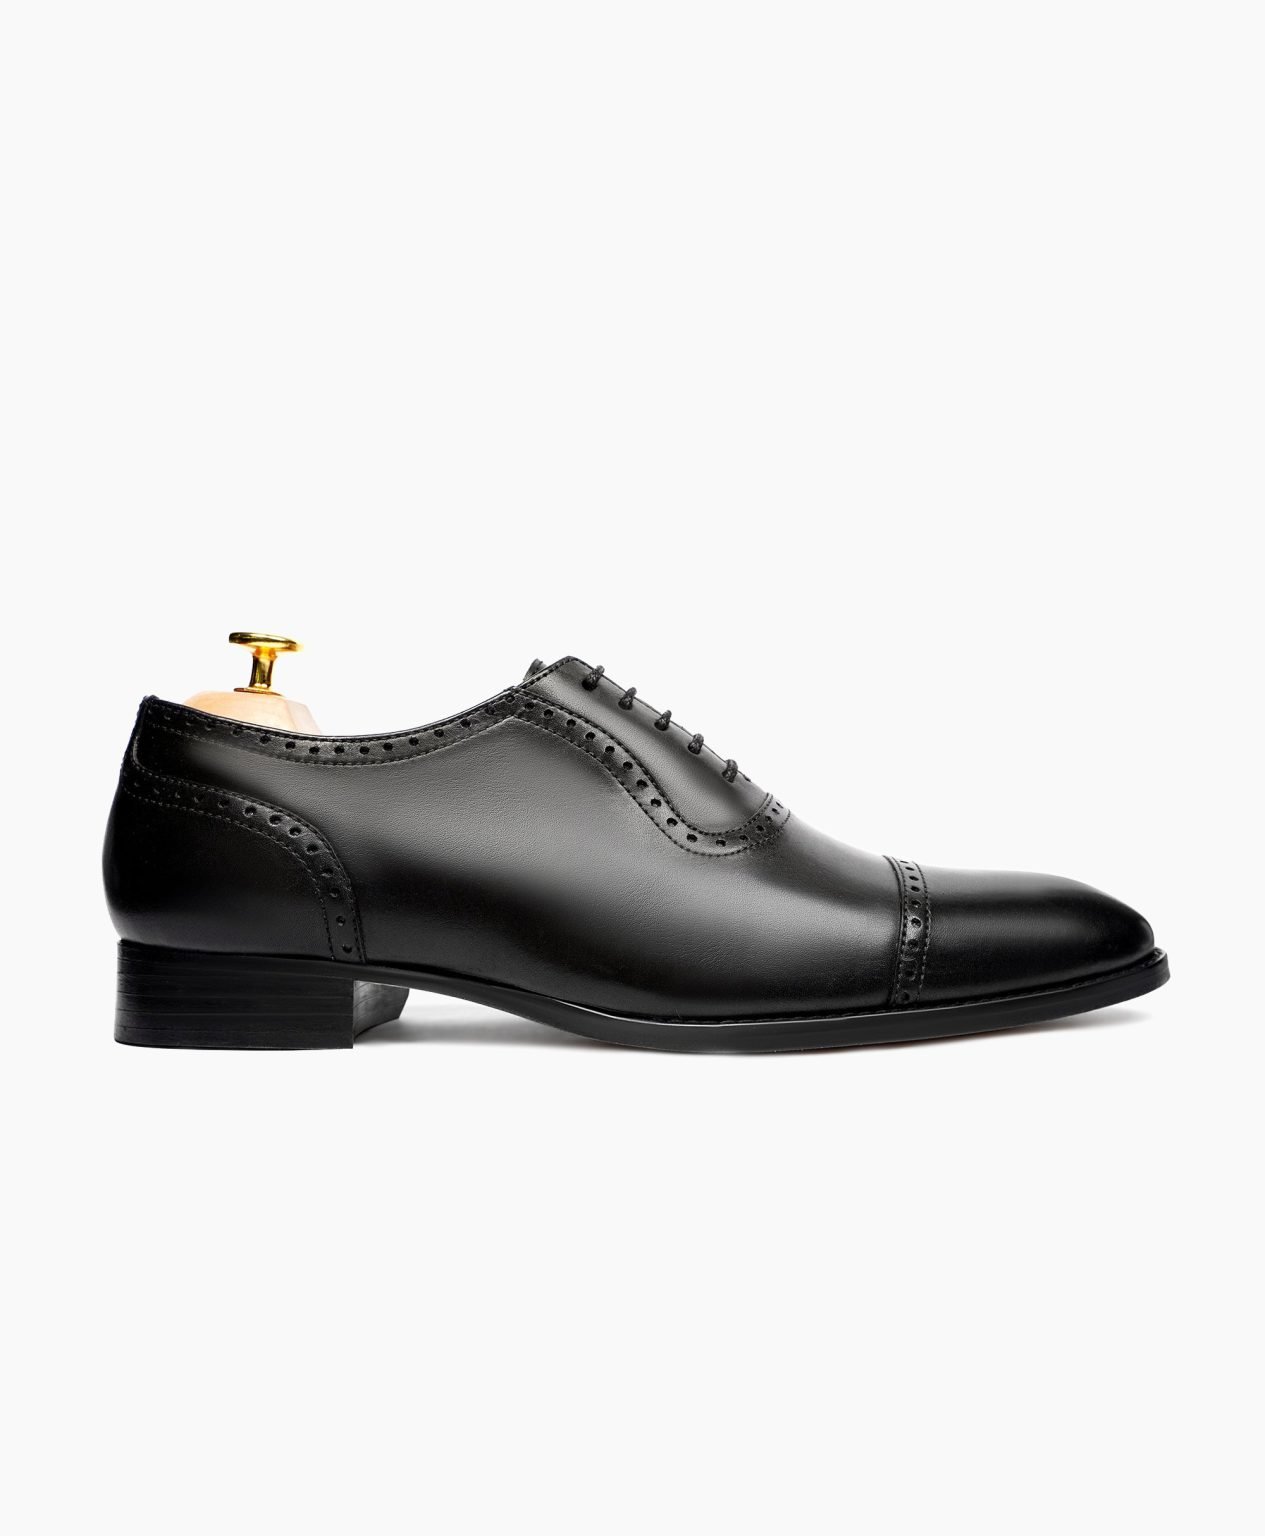 bodmin-oxford-black-leather-shoes-image201